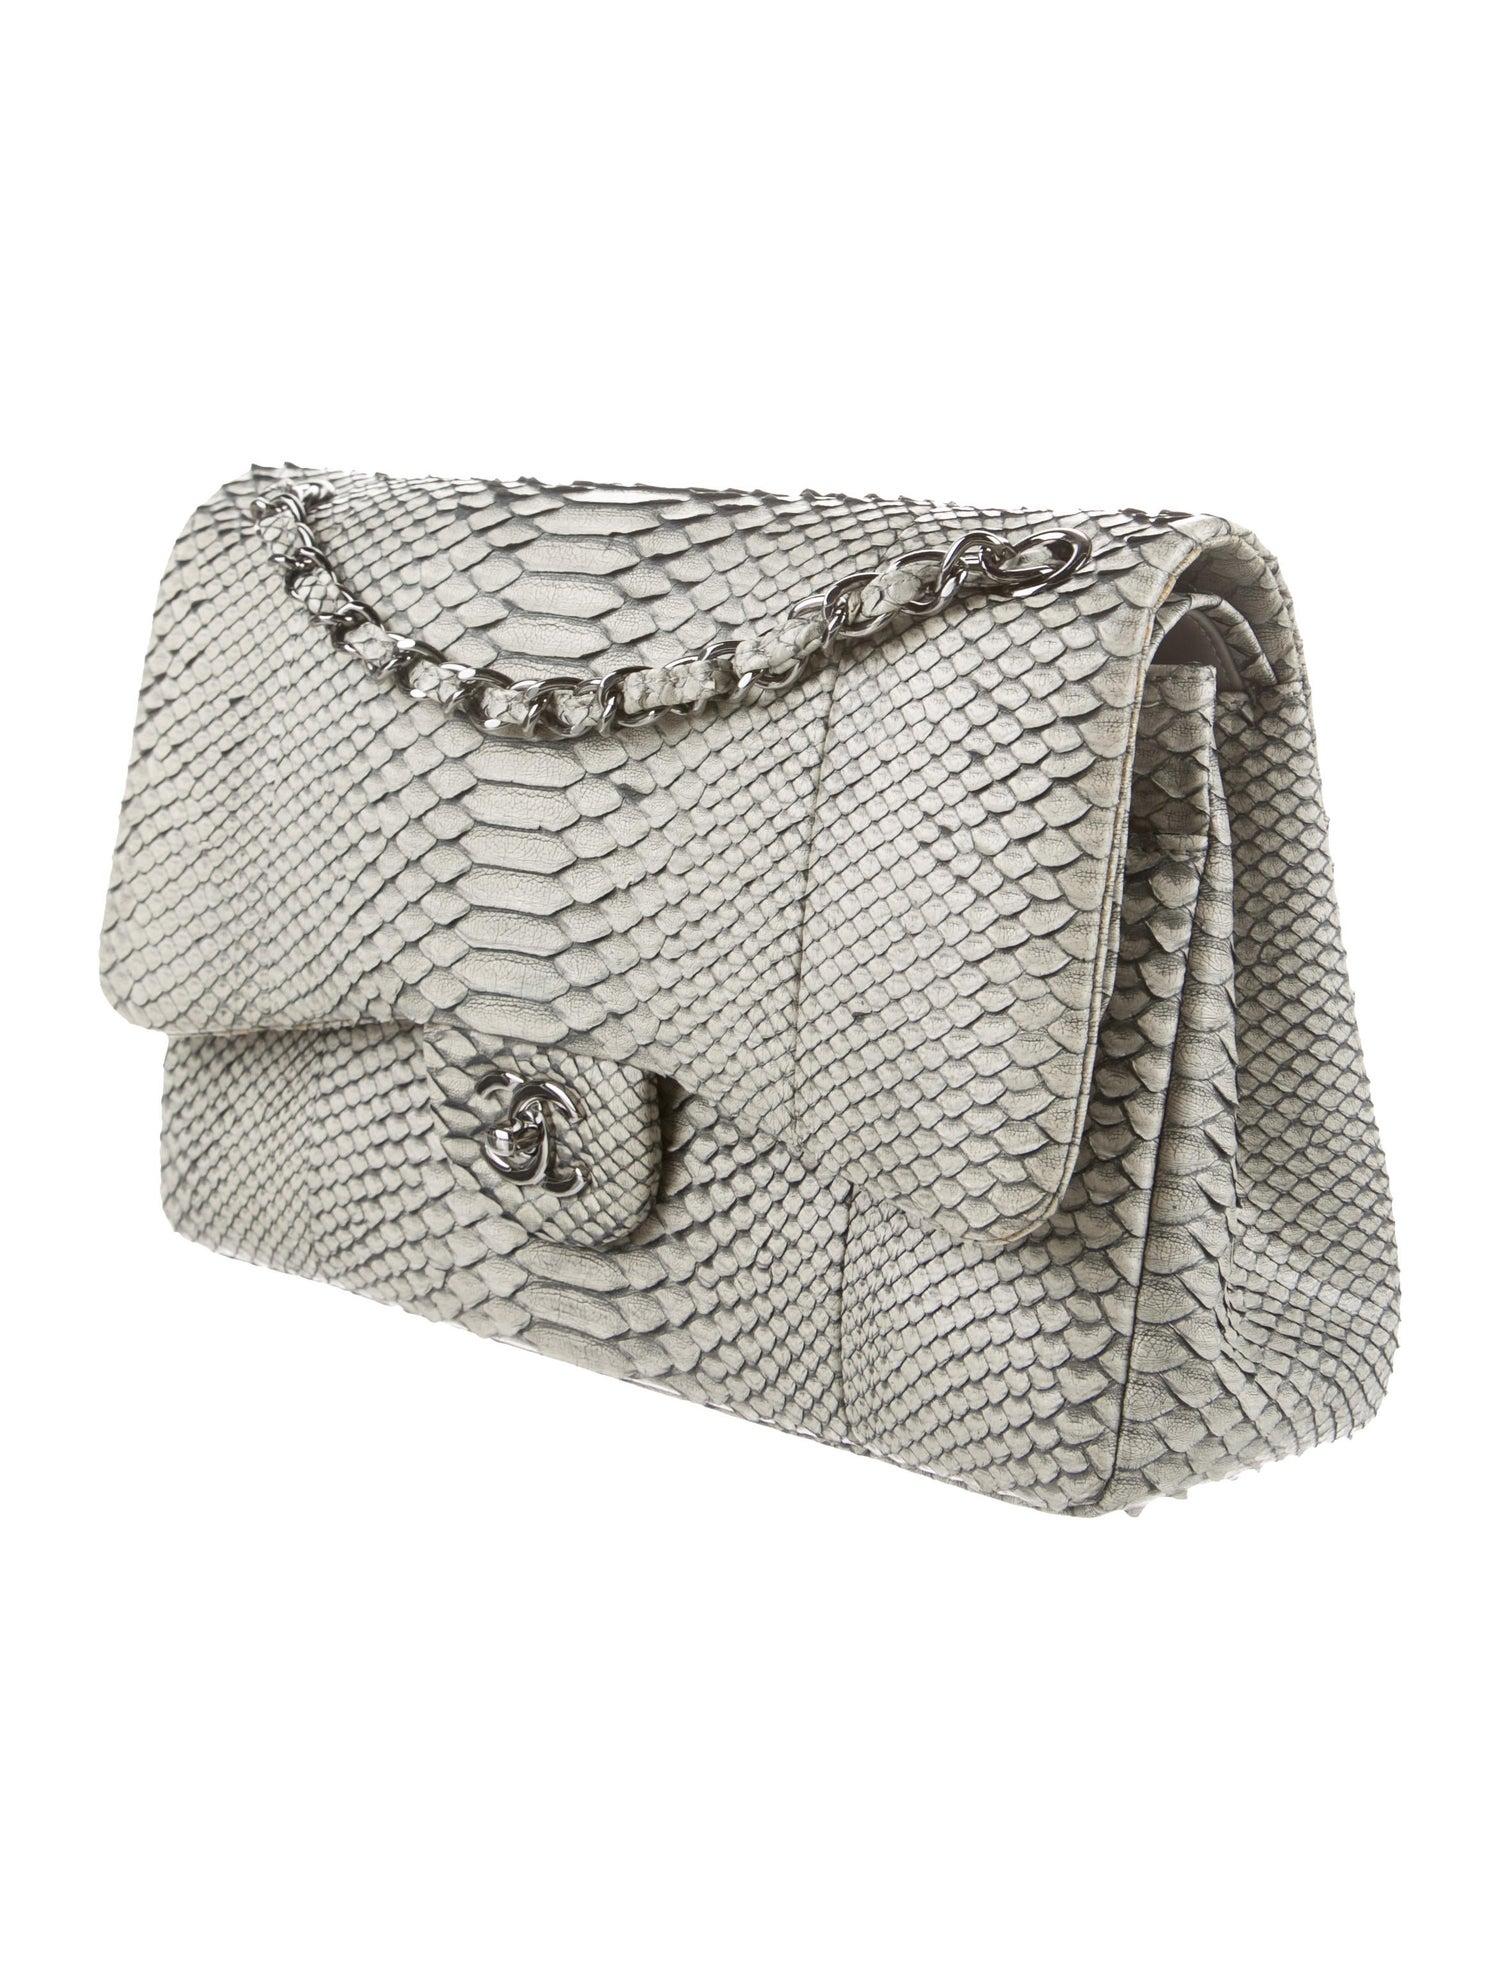 The Exotic Chanel You Need to Complement Your Collection.   

Since announcing the discontinuation of exotic skin handbags, the demand for exotic Chanel has increased tenfold. And the demand for snakeskin Chanel is no exception. Crafted of exotic